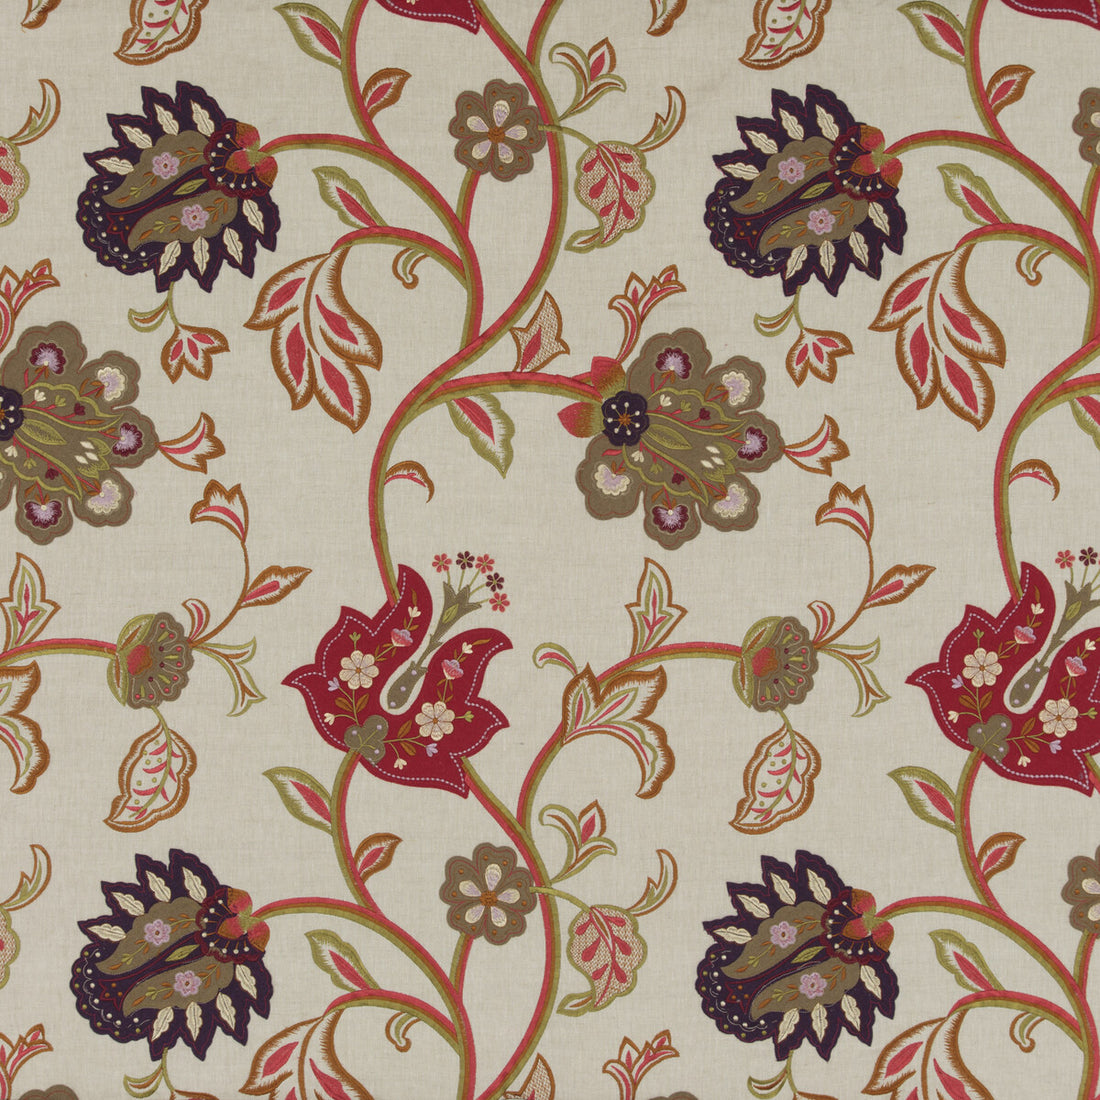 Floral Fantasy fabric in red/plum color - pattern FD763.V54.0 - by Mulberry in the Festival collection